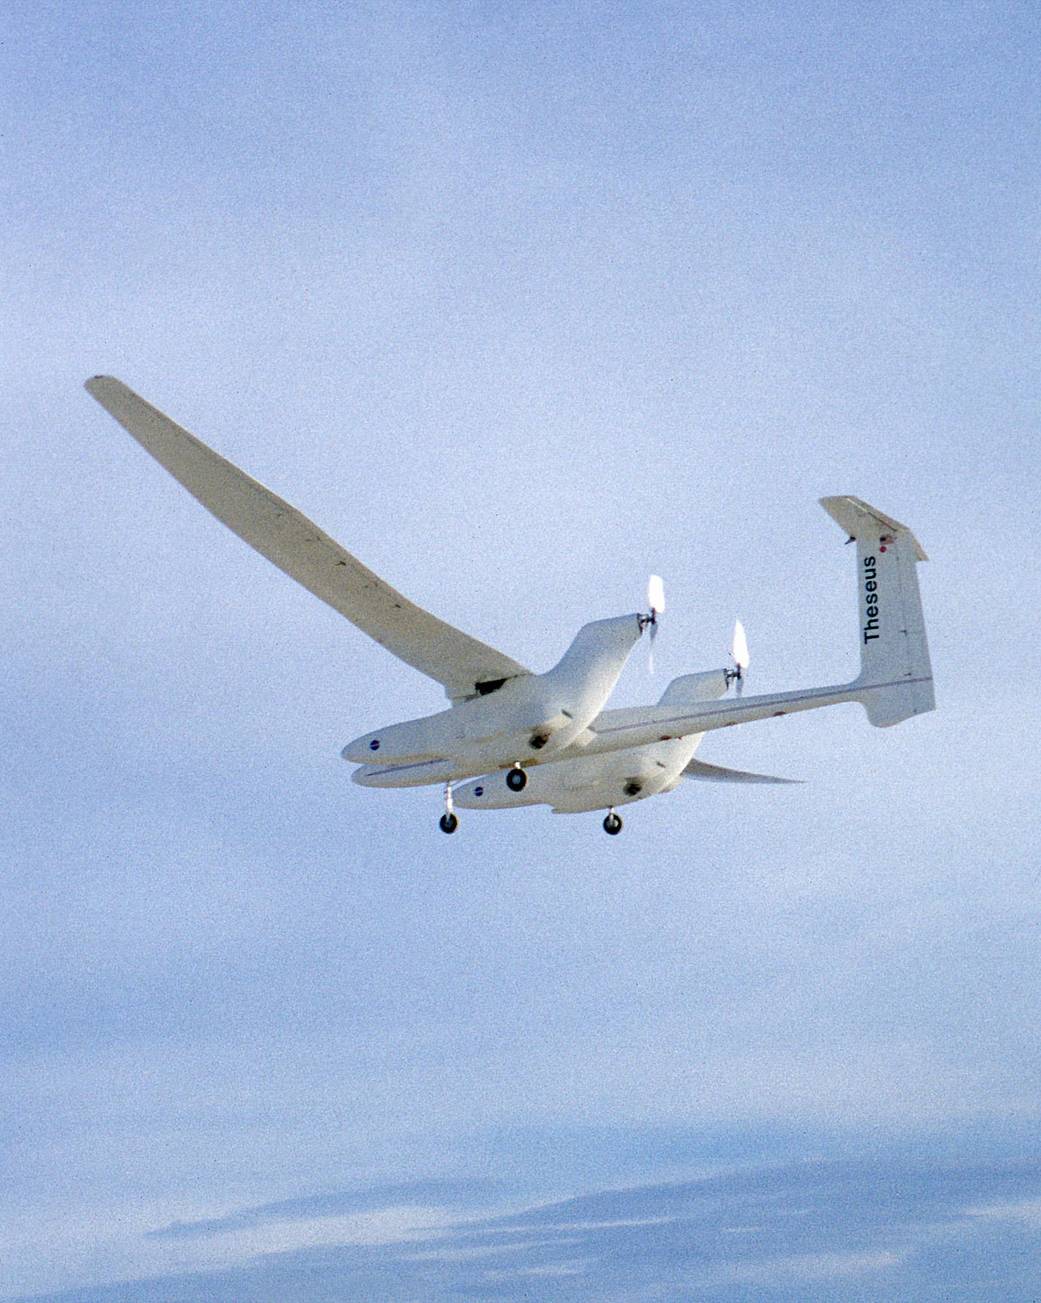 Theseus Remotely Piloted Aircraft